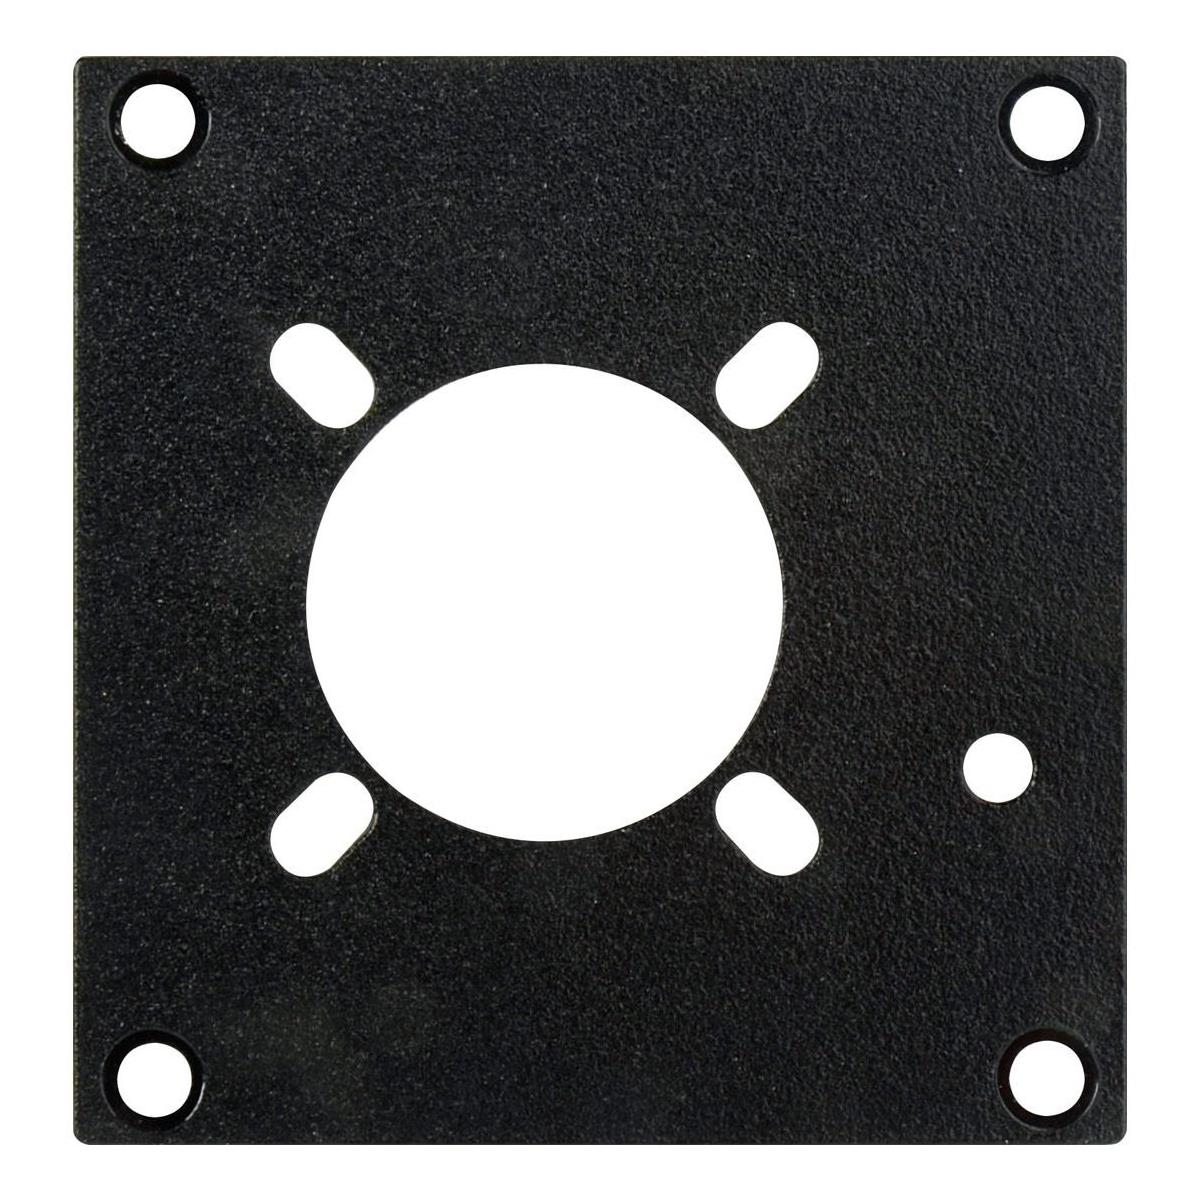 Image of Camplex LEMO SMPTE Plug or Jack (Holds Either) Pre-Punched Frame Module